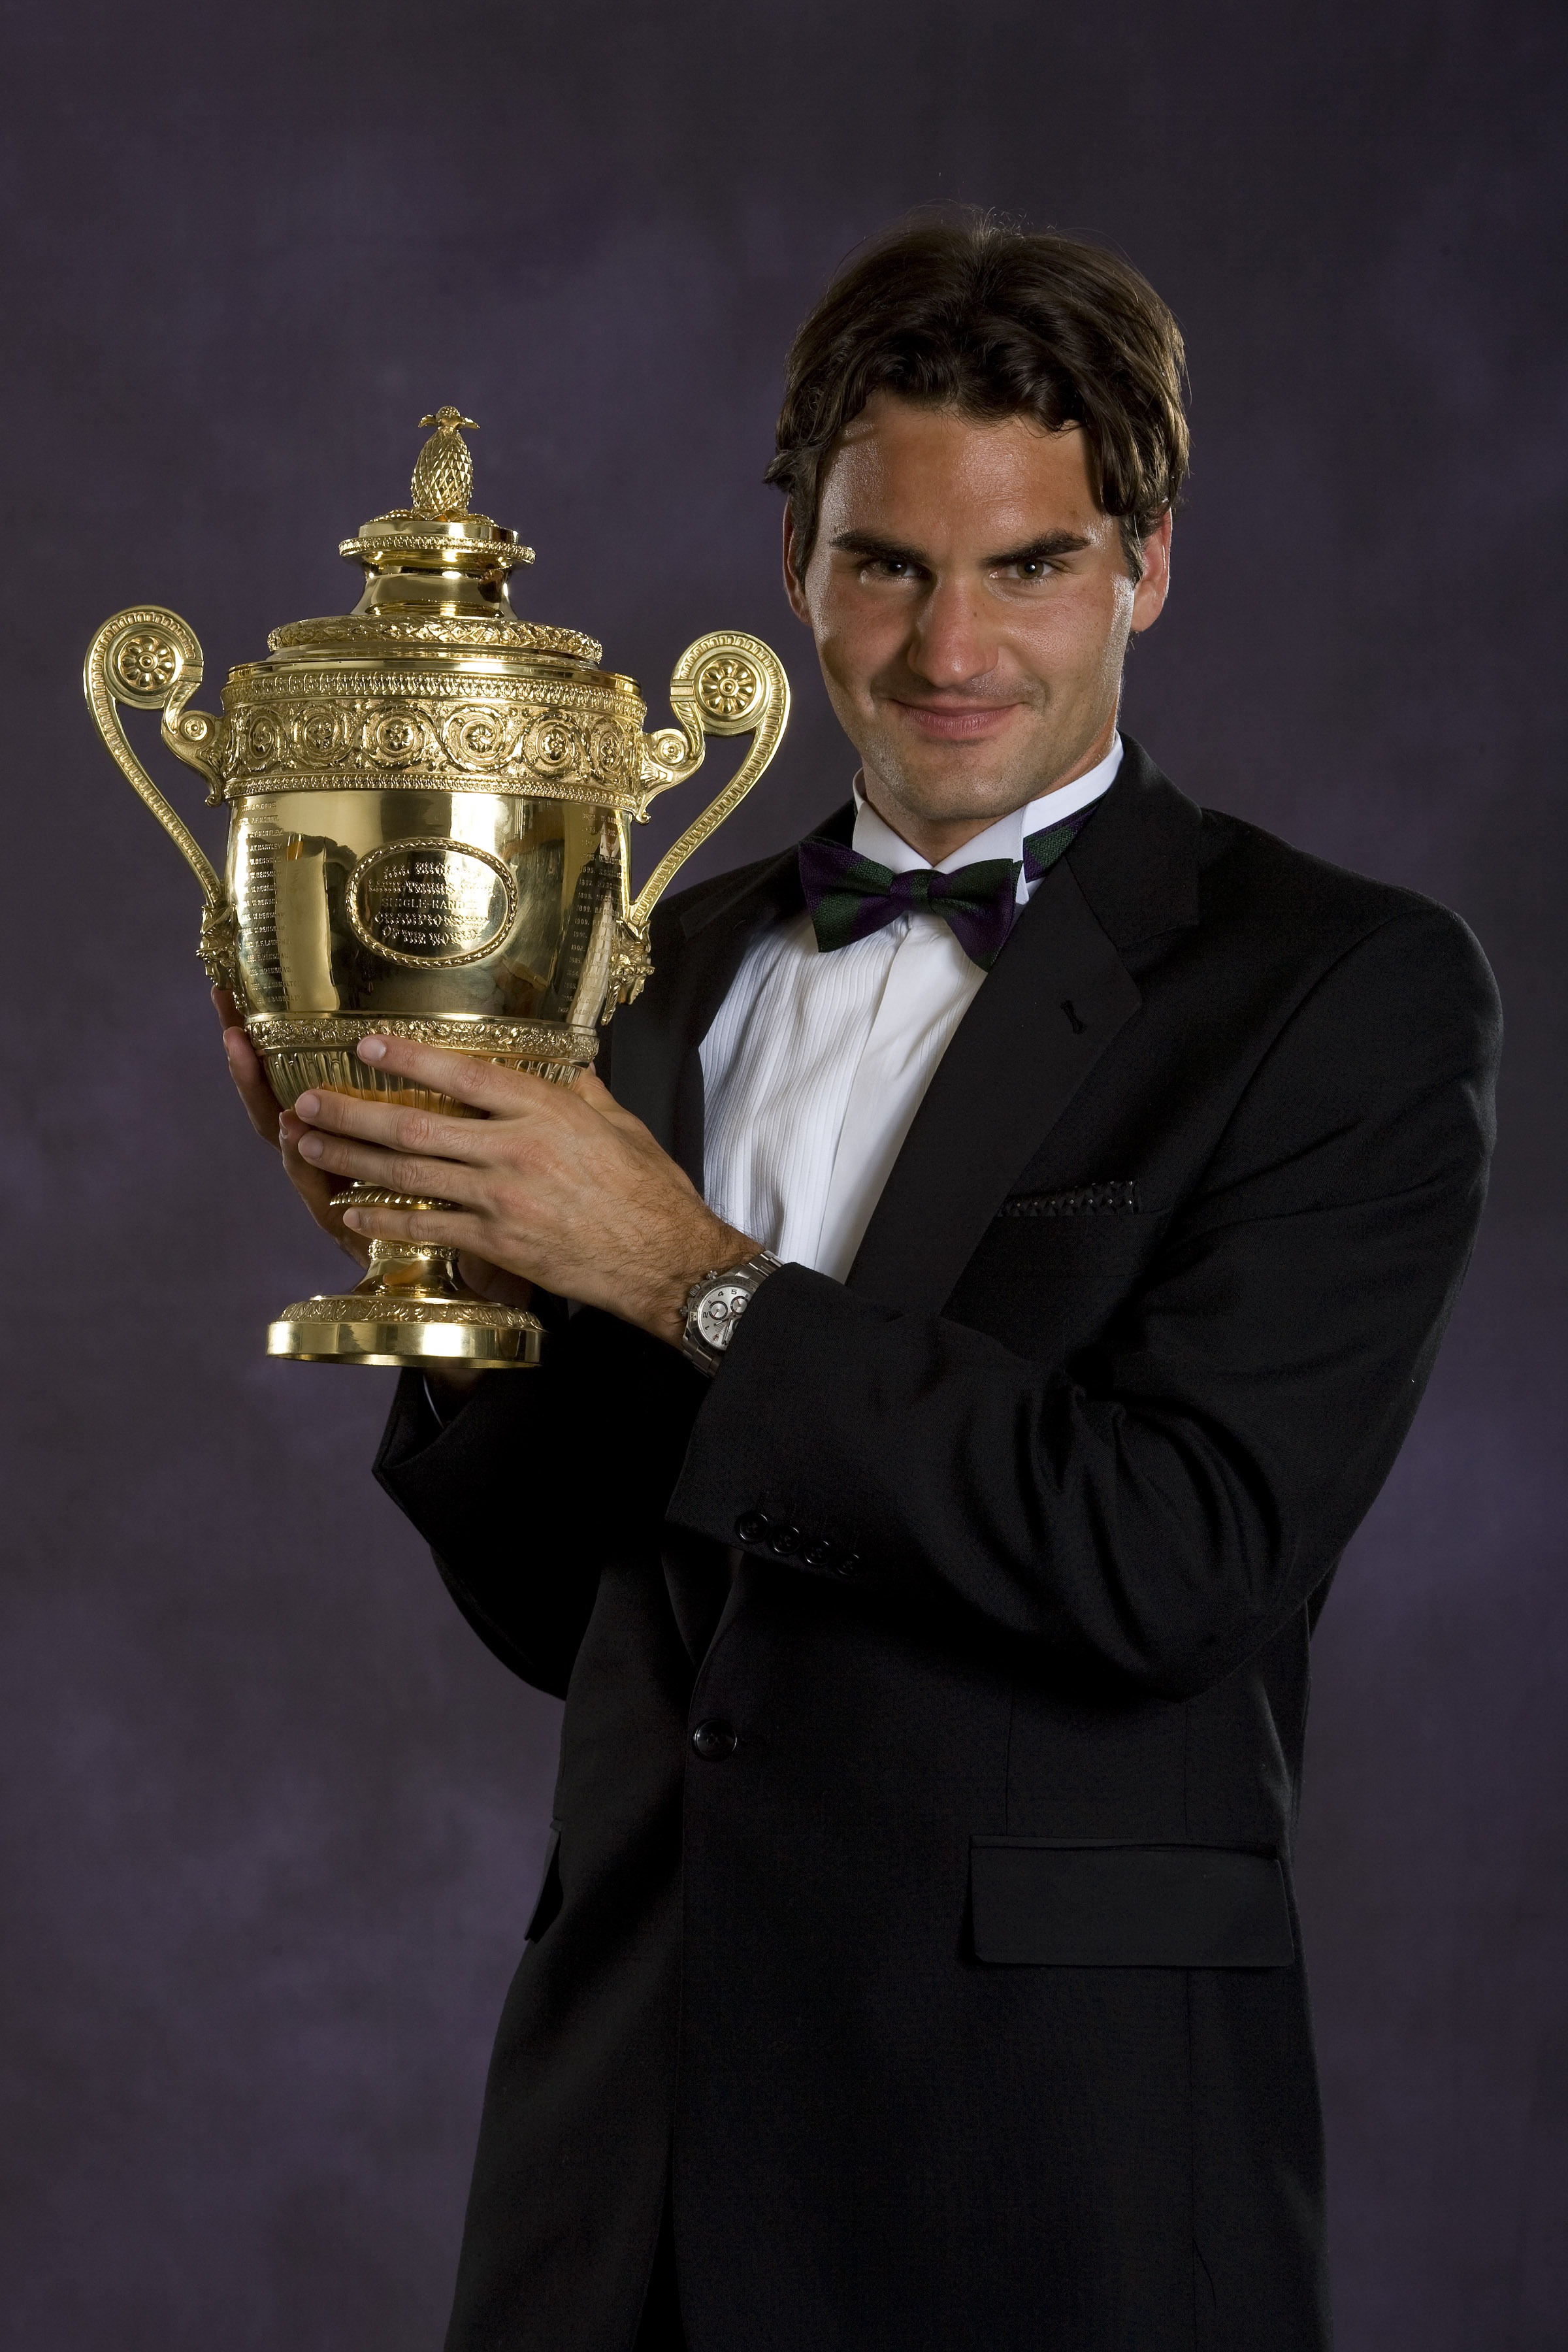 LONDON - JULY 8:  Roger Federer of Switzerland, men's singles Wimbledon champion, poses with the trophy at the Champions' Dinner on July 8, 2007 at The Savoy, London, England. (Photo by Bob Martin-Pool/Getty Images)